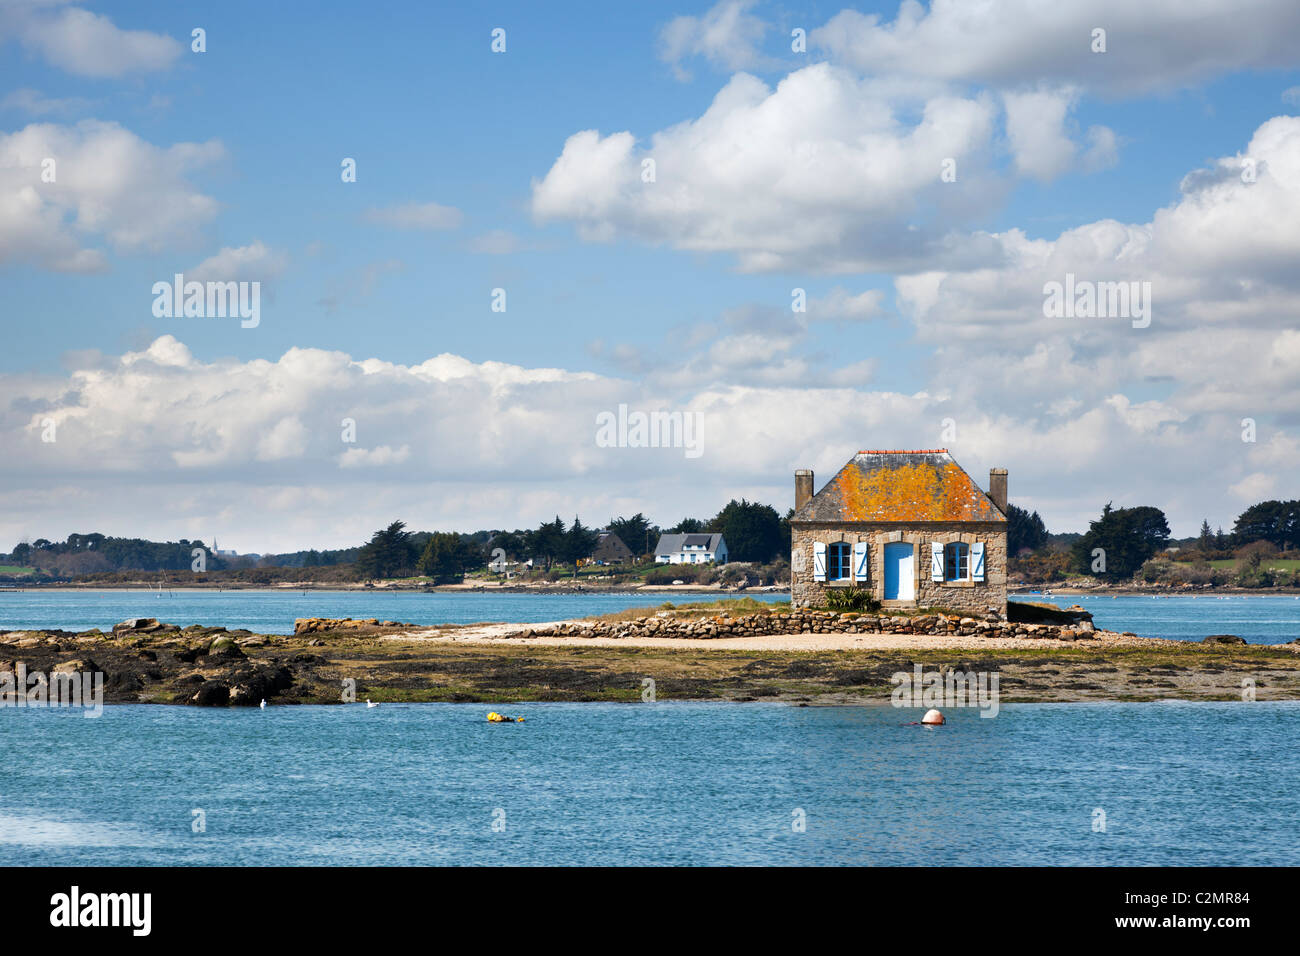 Small fisherman's cottage on an island at Saint Cado, Morbihan, Brittany, France, Europe Stock Photo